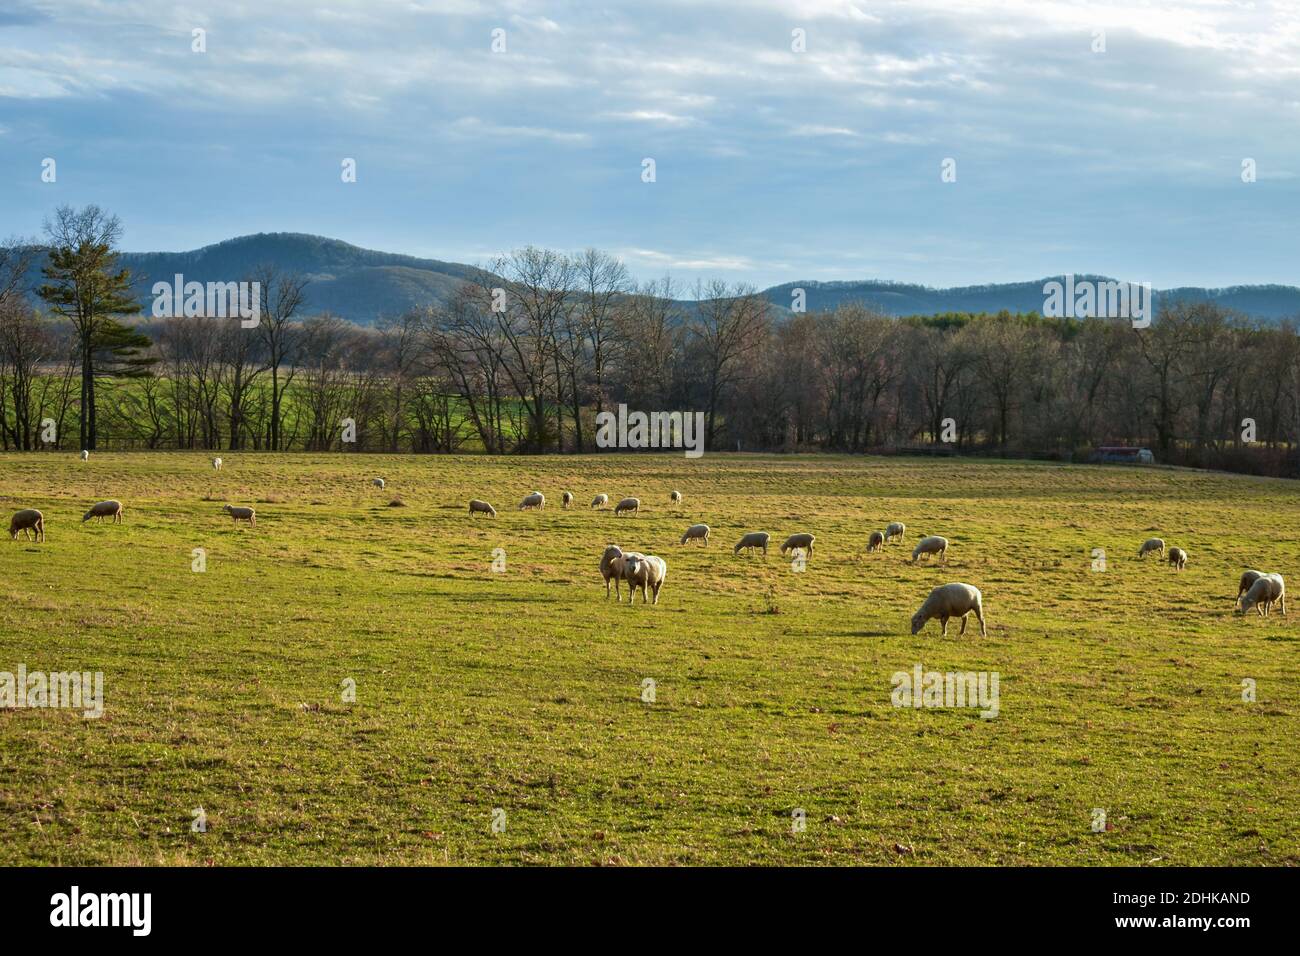 Sheep graze in an autumn field with blue mountains in the background. Stock Photo